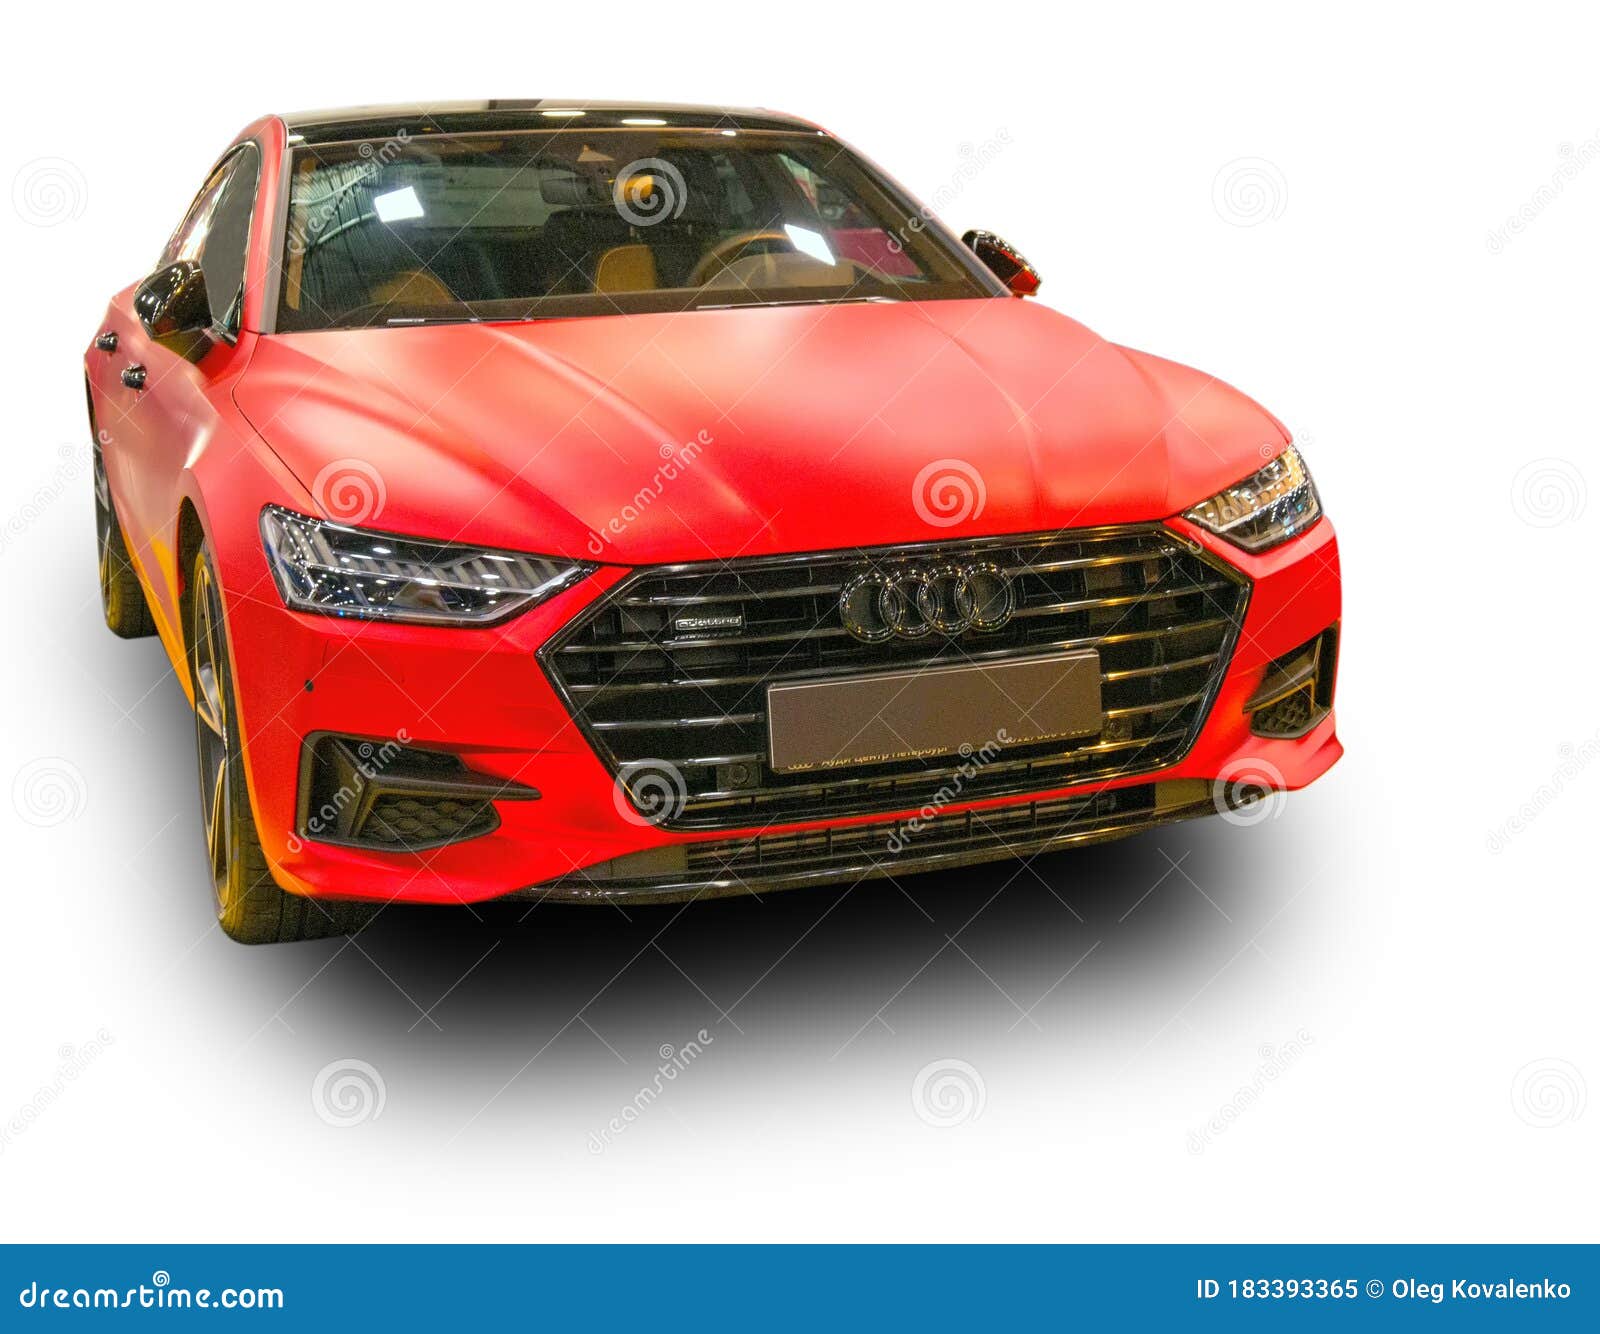 Create Quality Car Photos Using Background Removal and Editing  Impel